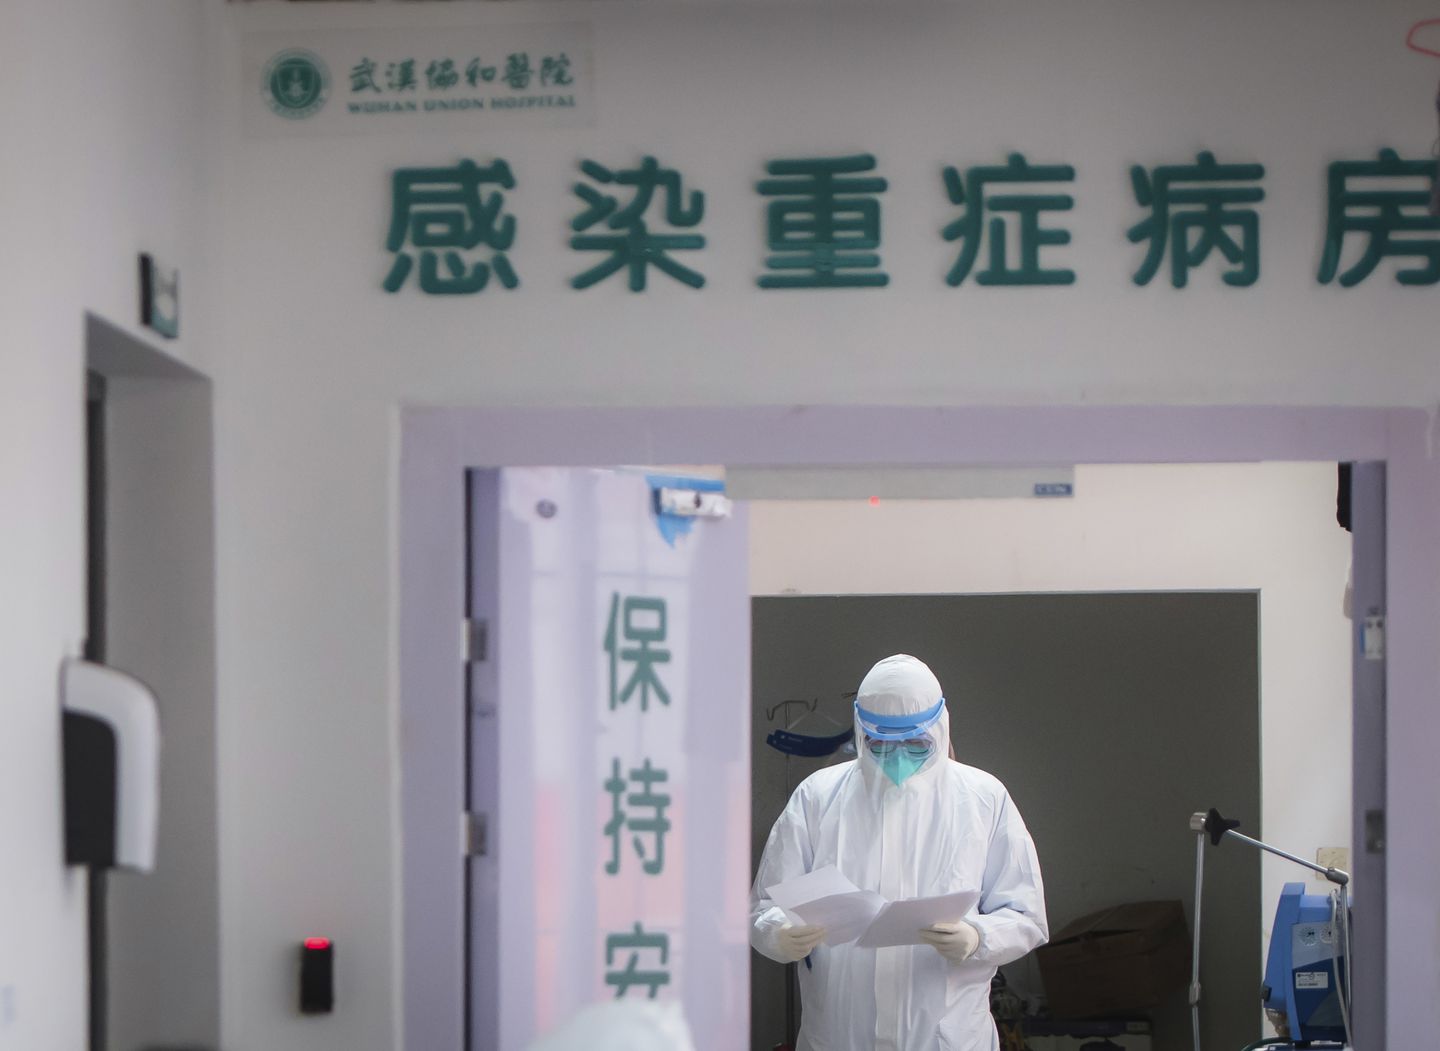 Chinese Medical Personel in Haz-Mat